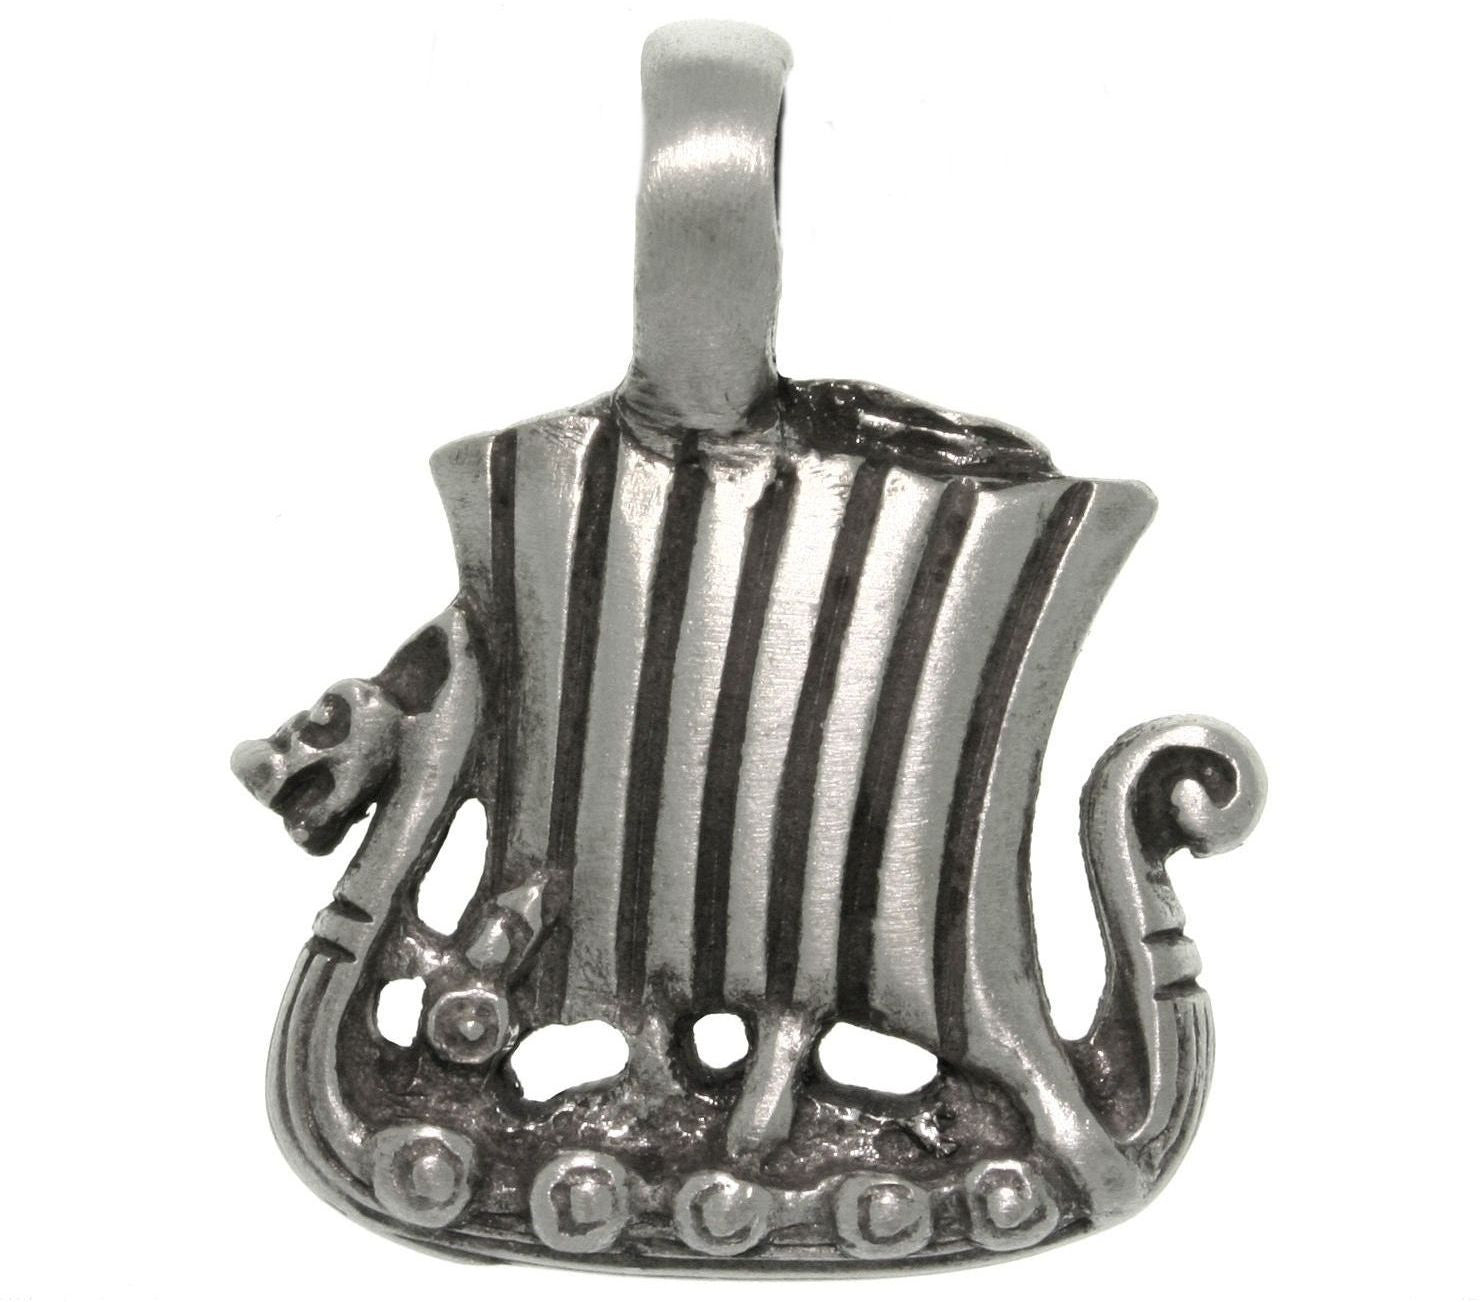 Jewelry Trends Antiqued Pewter Viking Ship Pendant